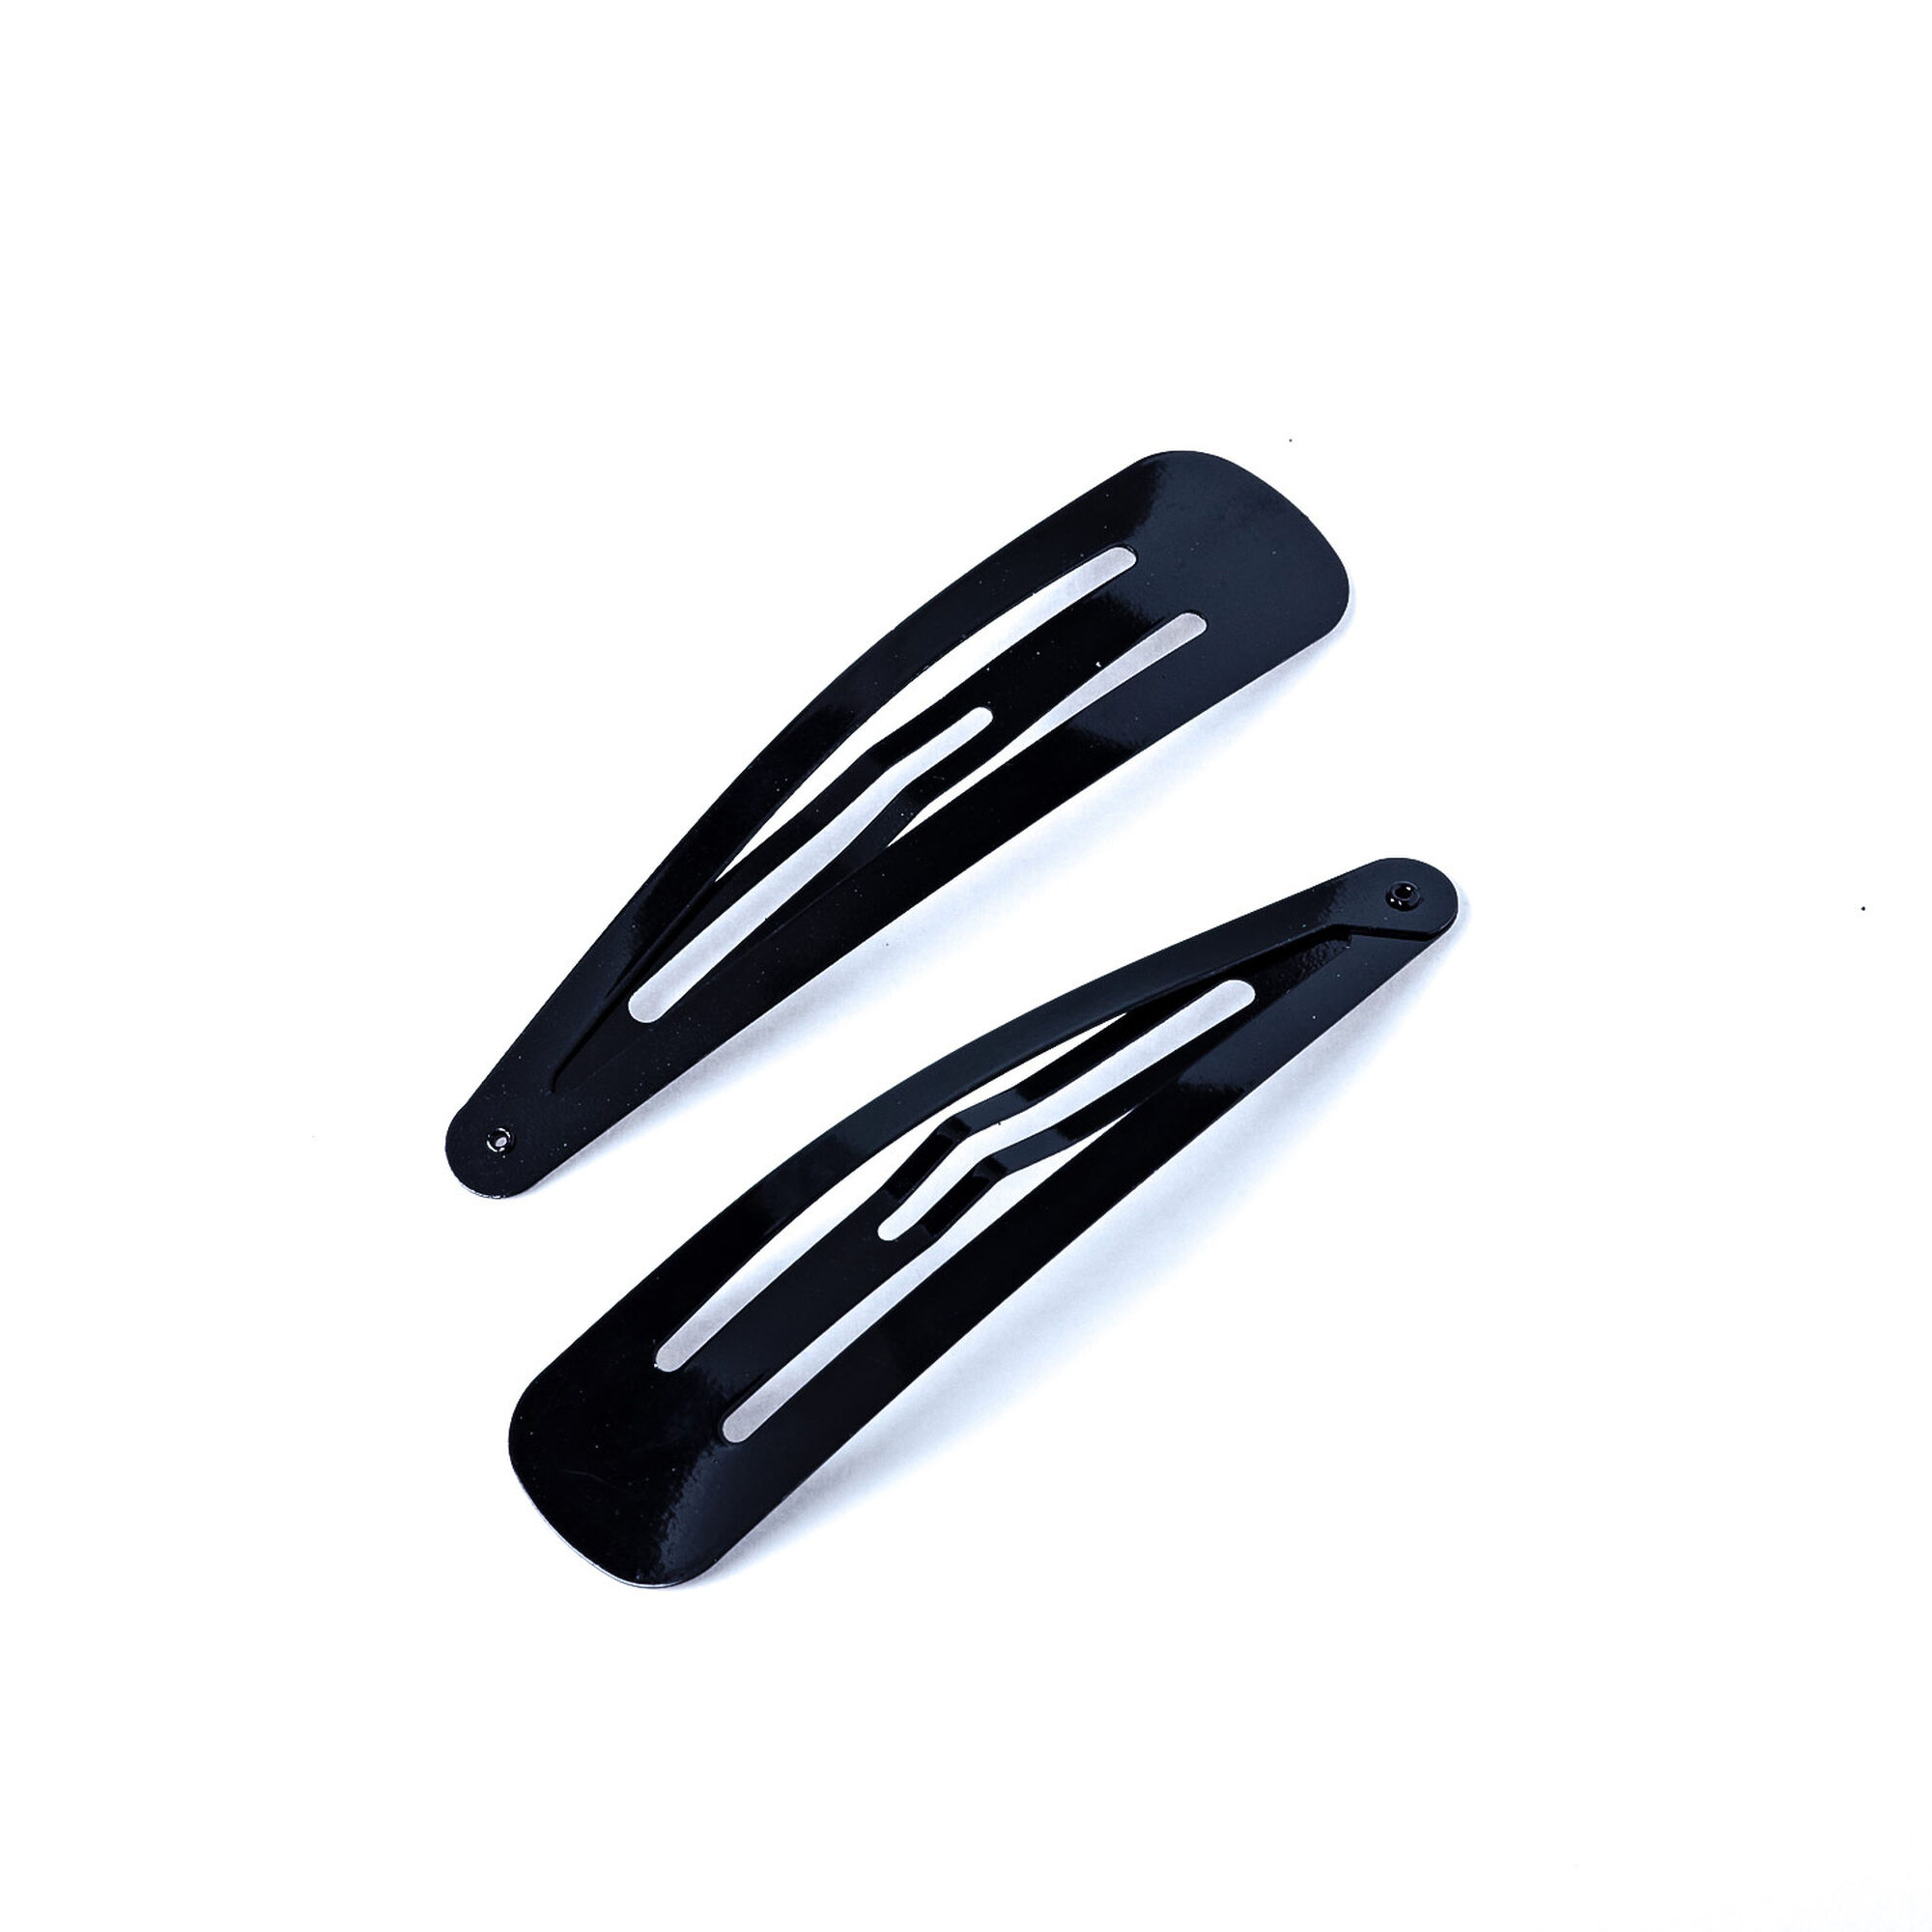 Jumbo Snap Hair Clips - Black, 2 Pack | Claire's